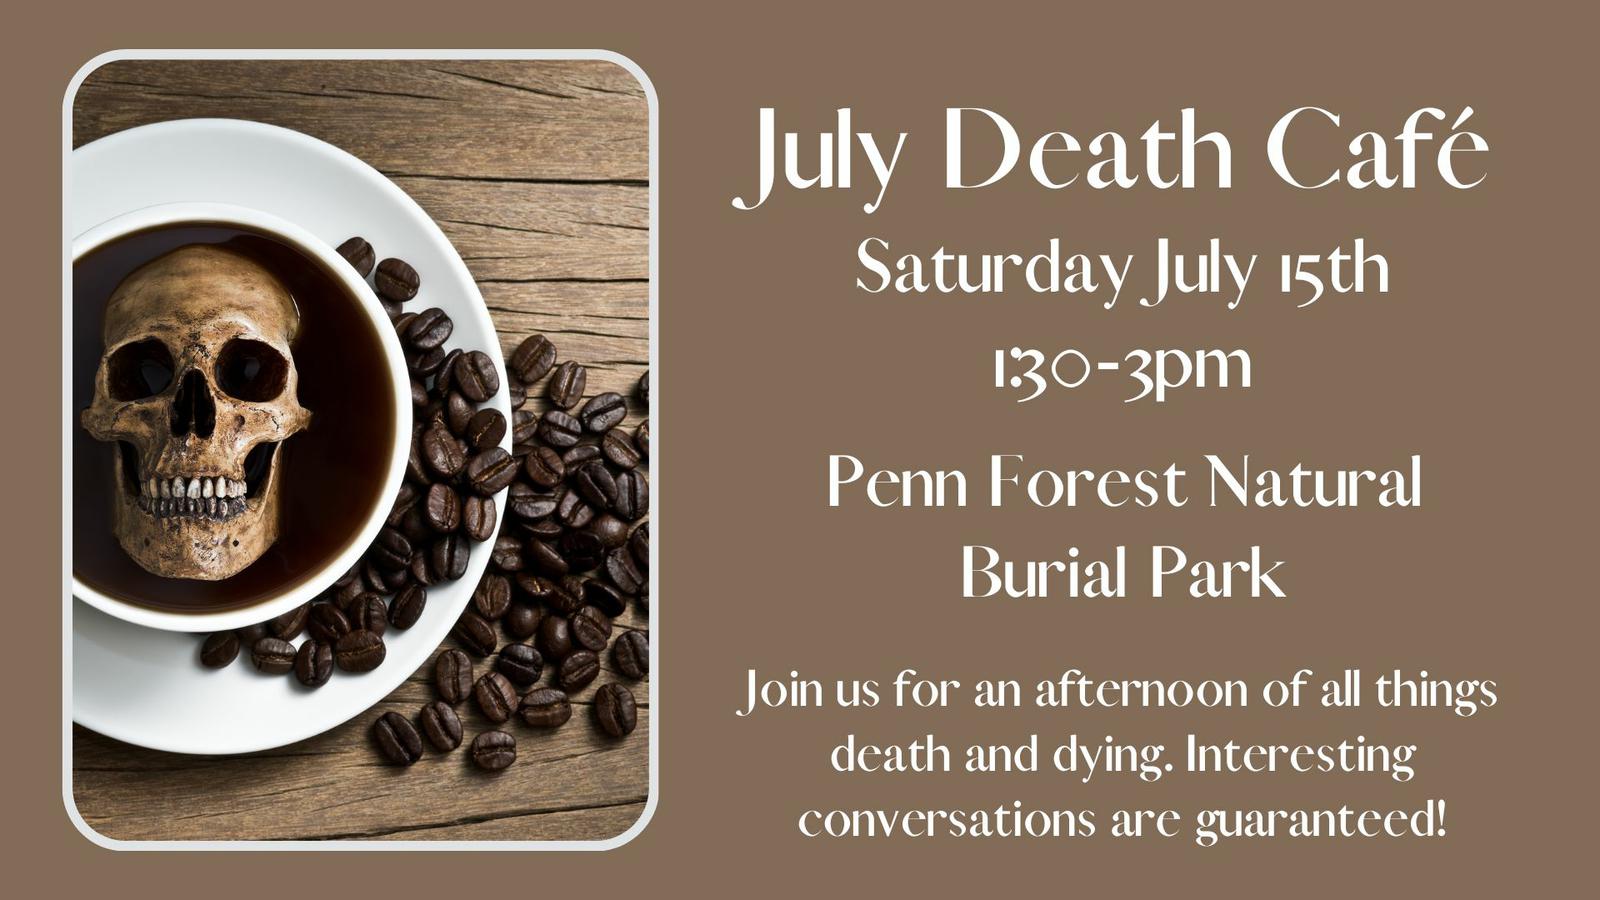 July Death Cafe at Penn Forest